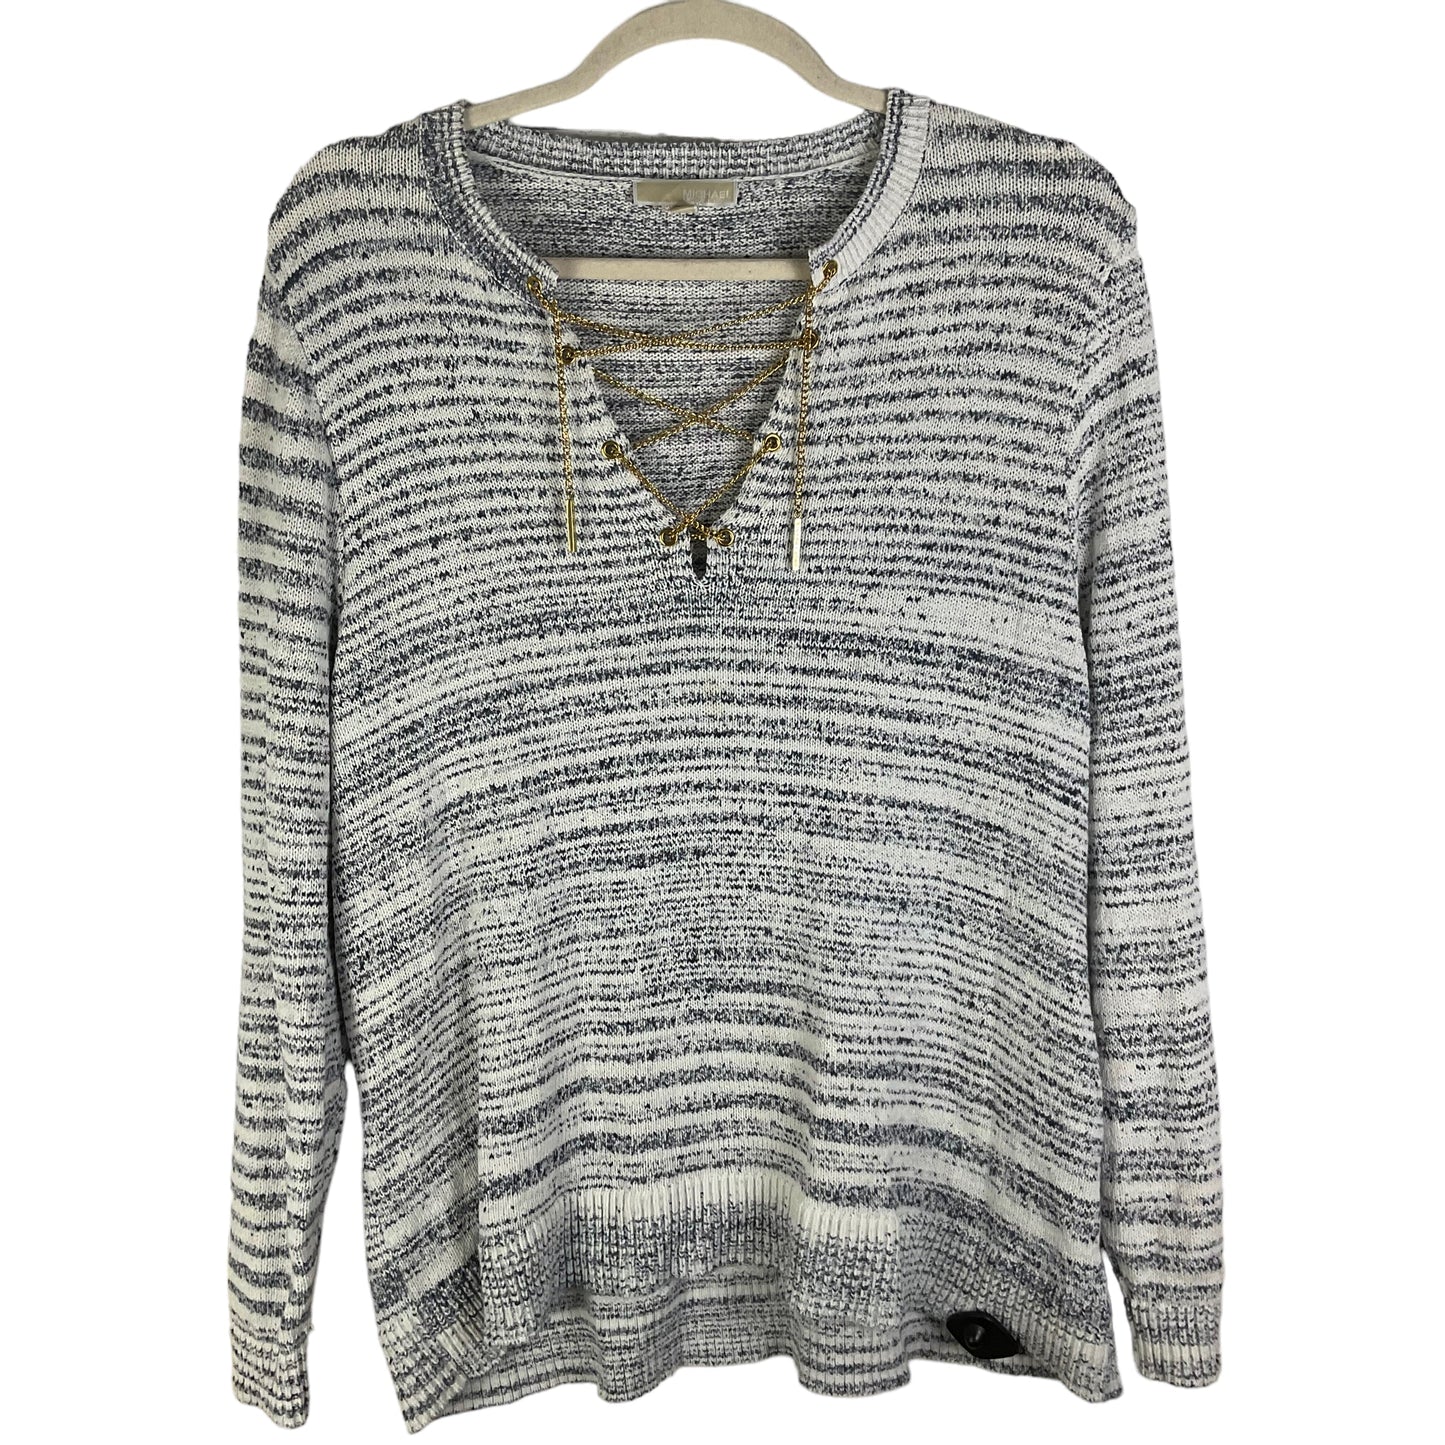 Sweater By Michael Kors  Size: 3x